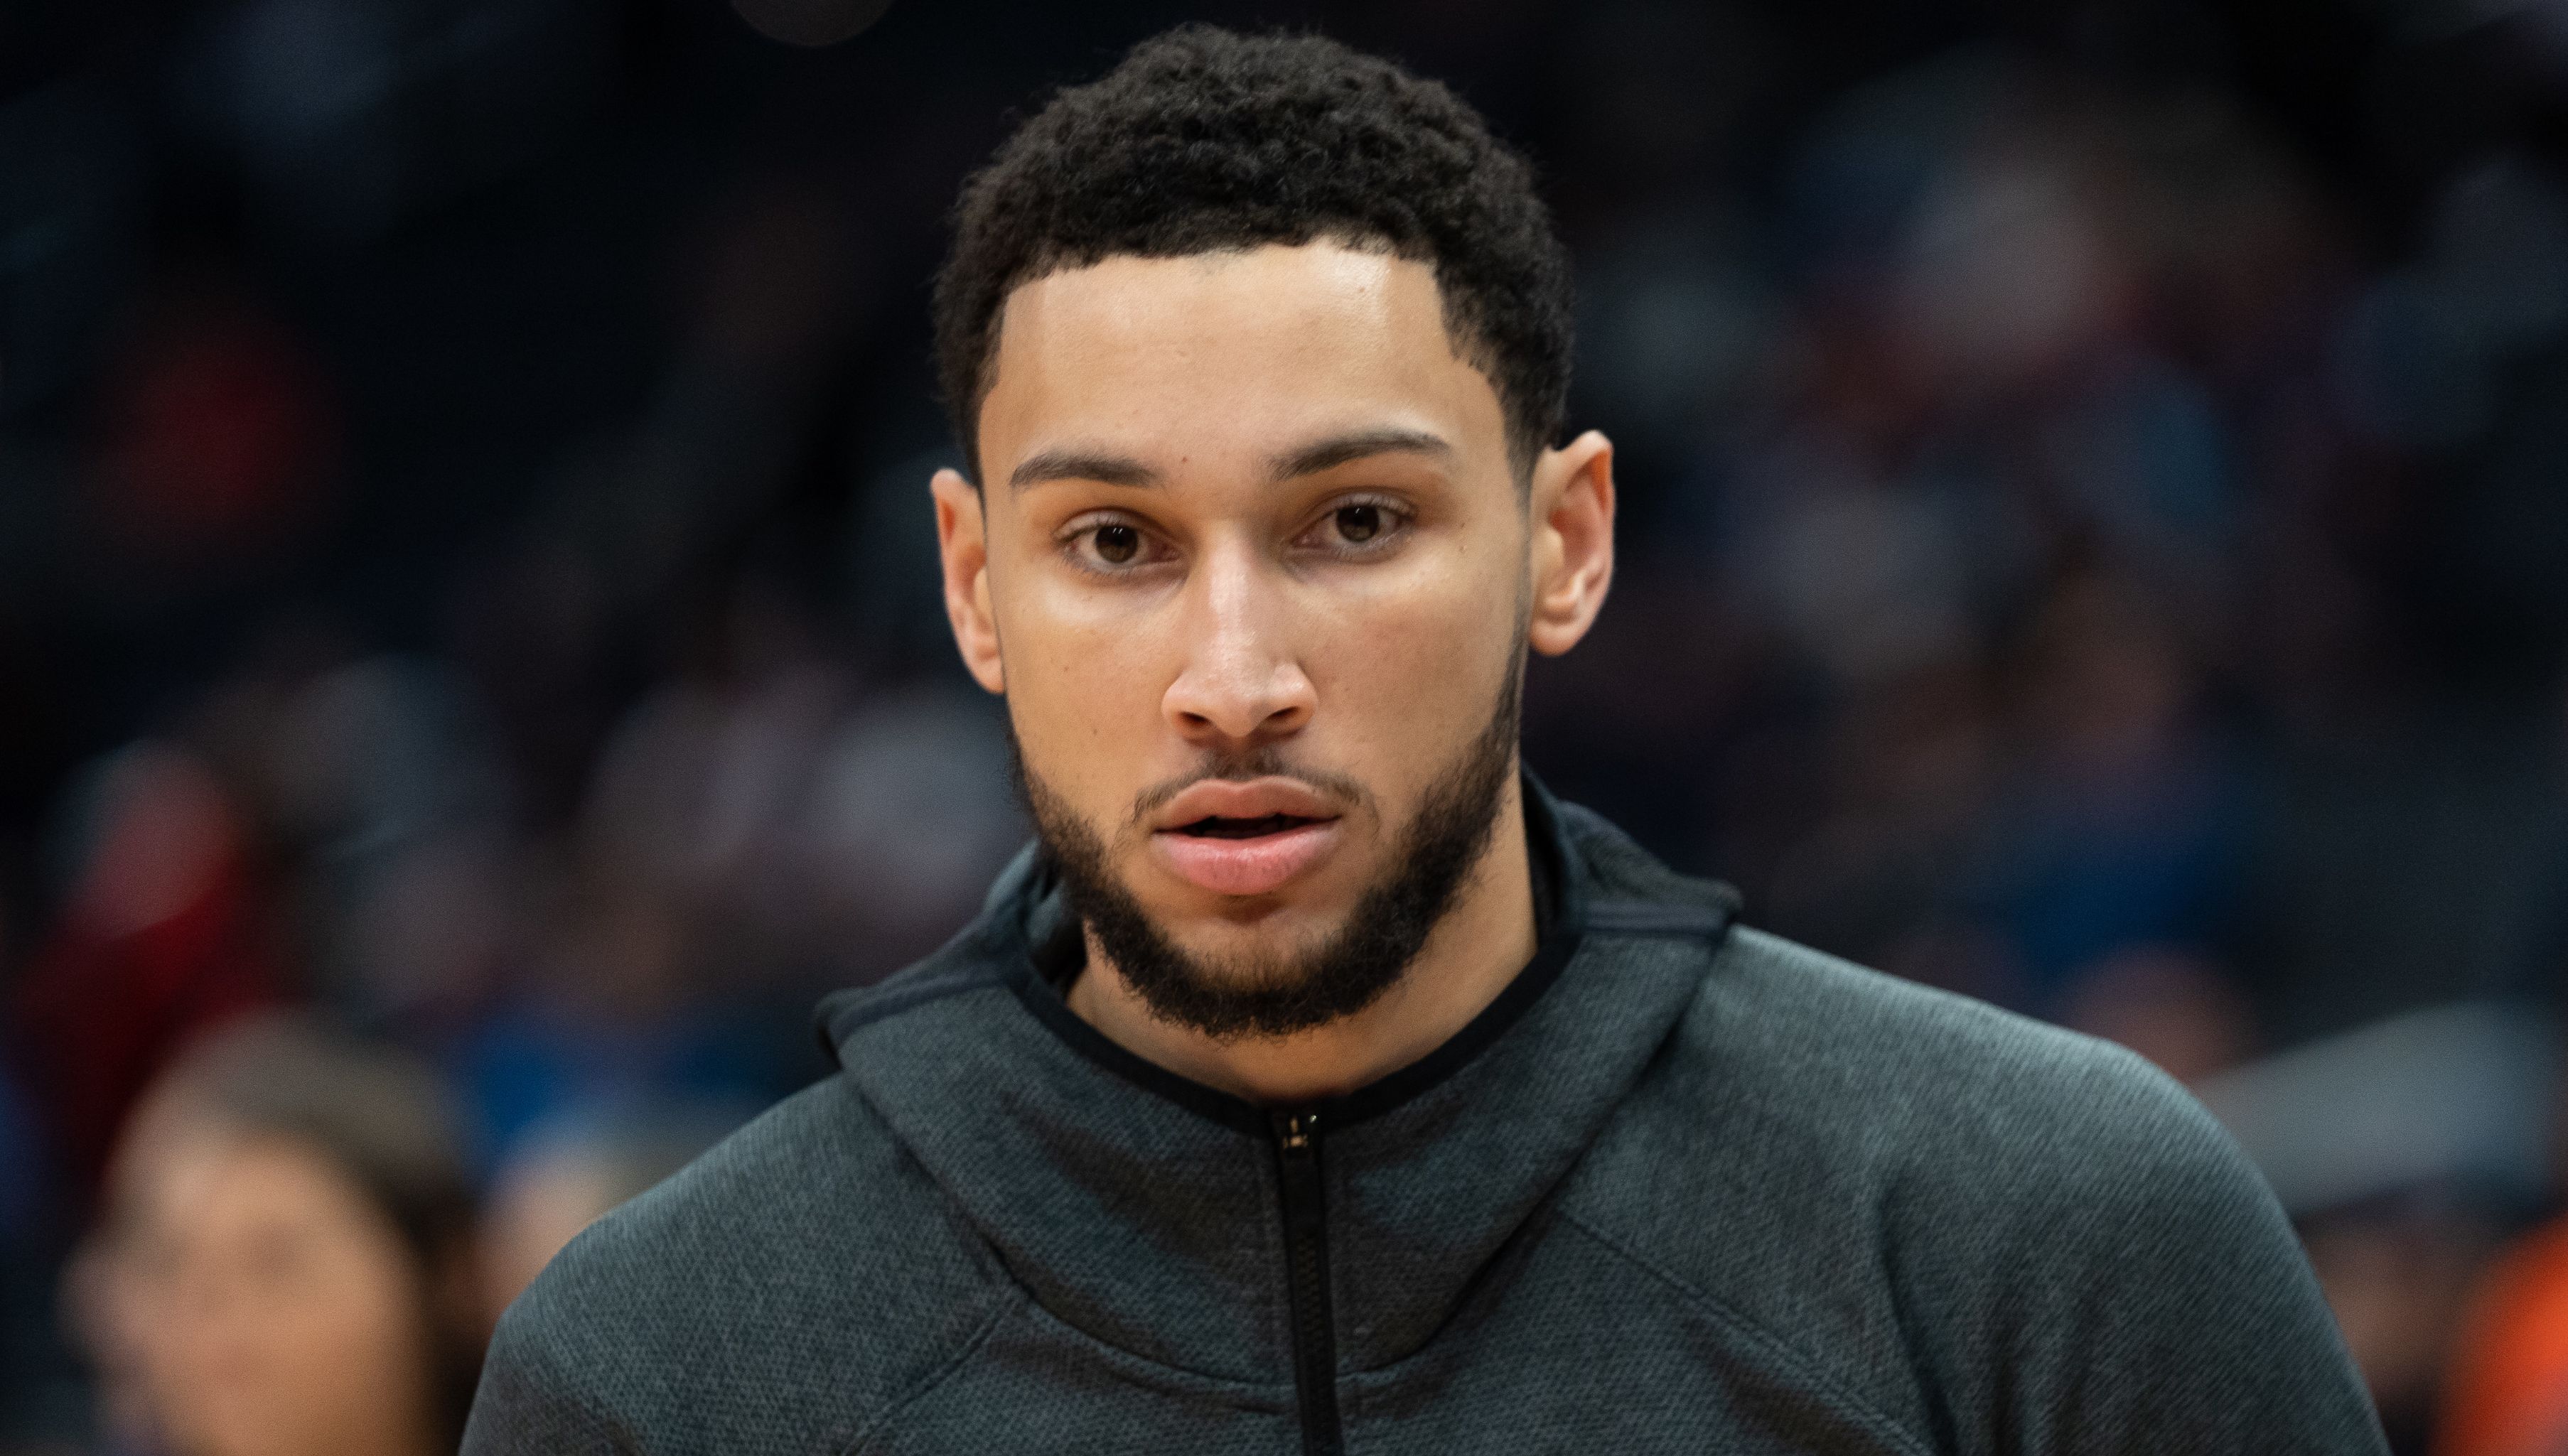 Ben Simmons wearing a warm up suit